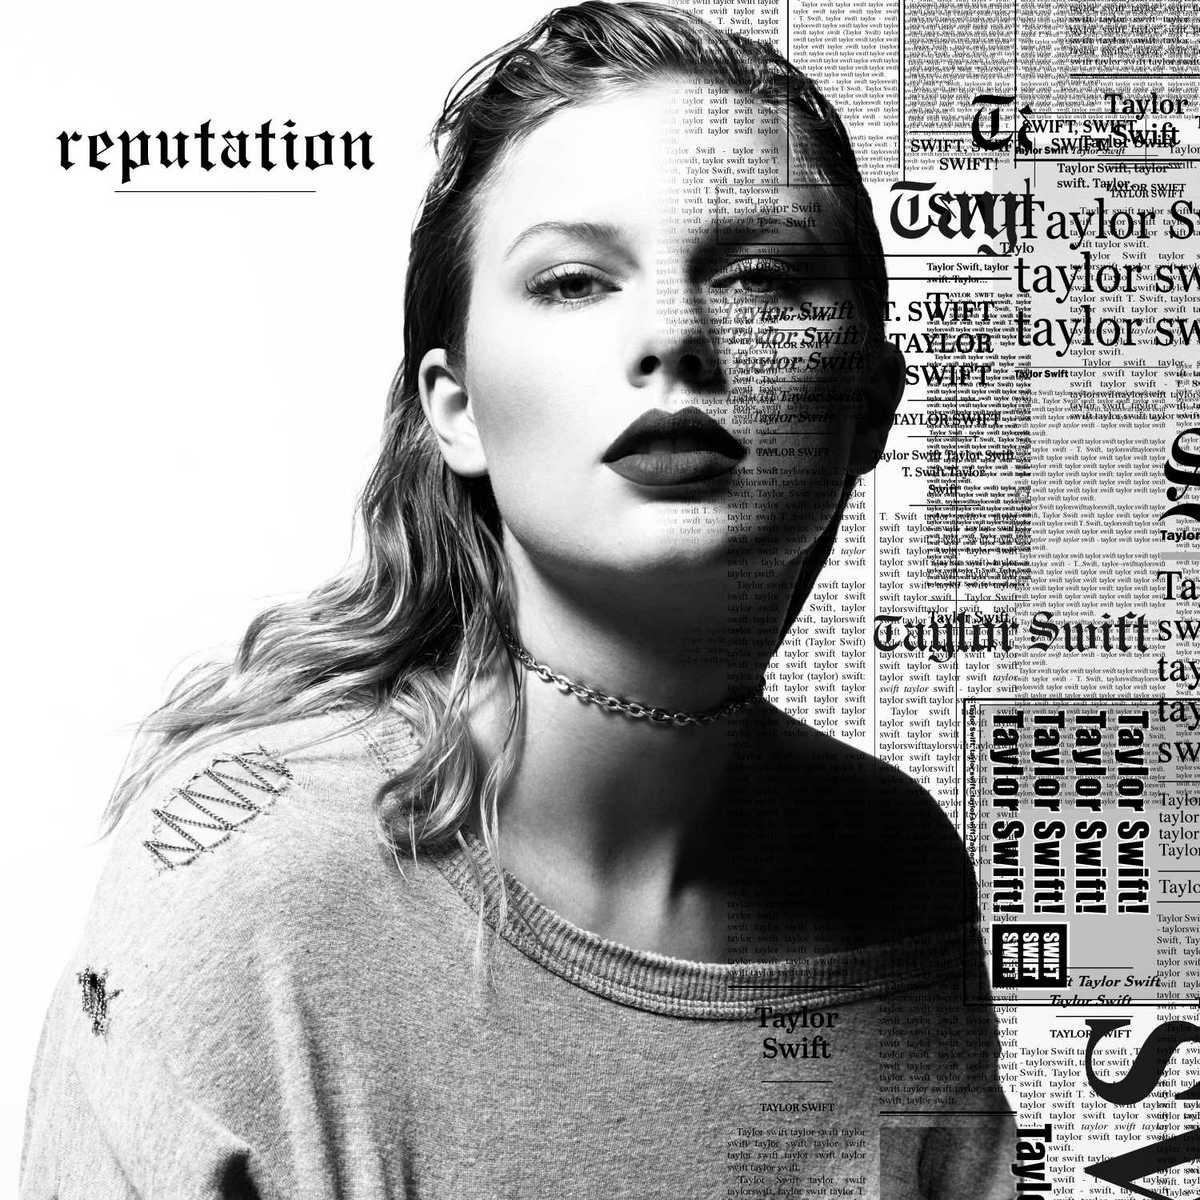 Taylor Swift builds a new “reputation”